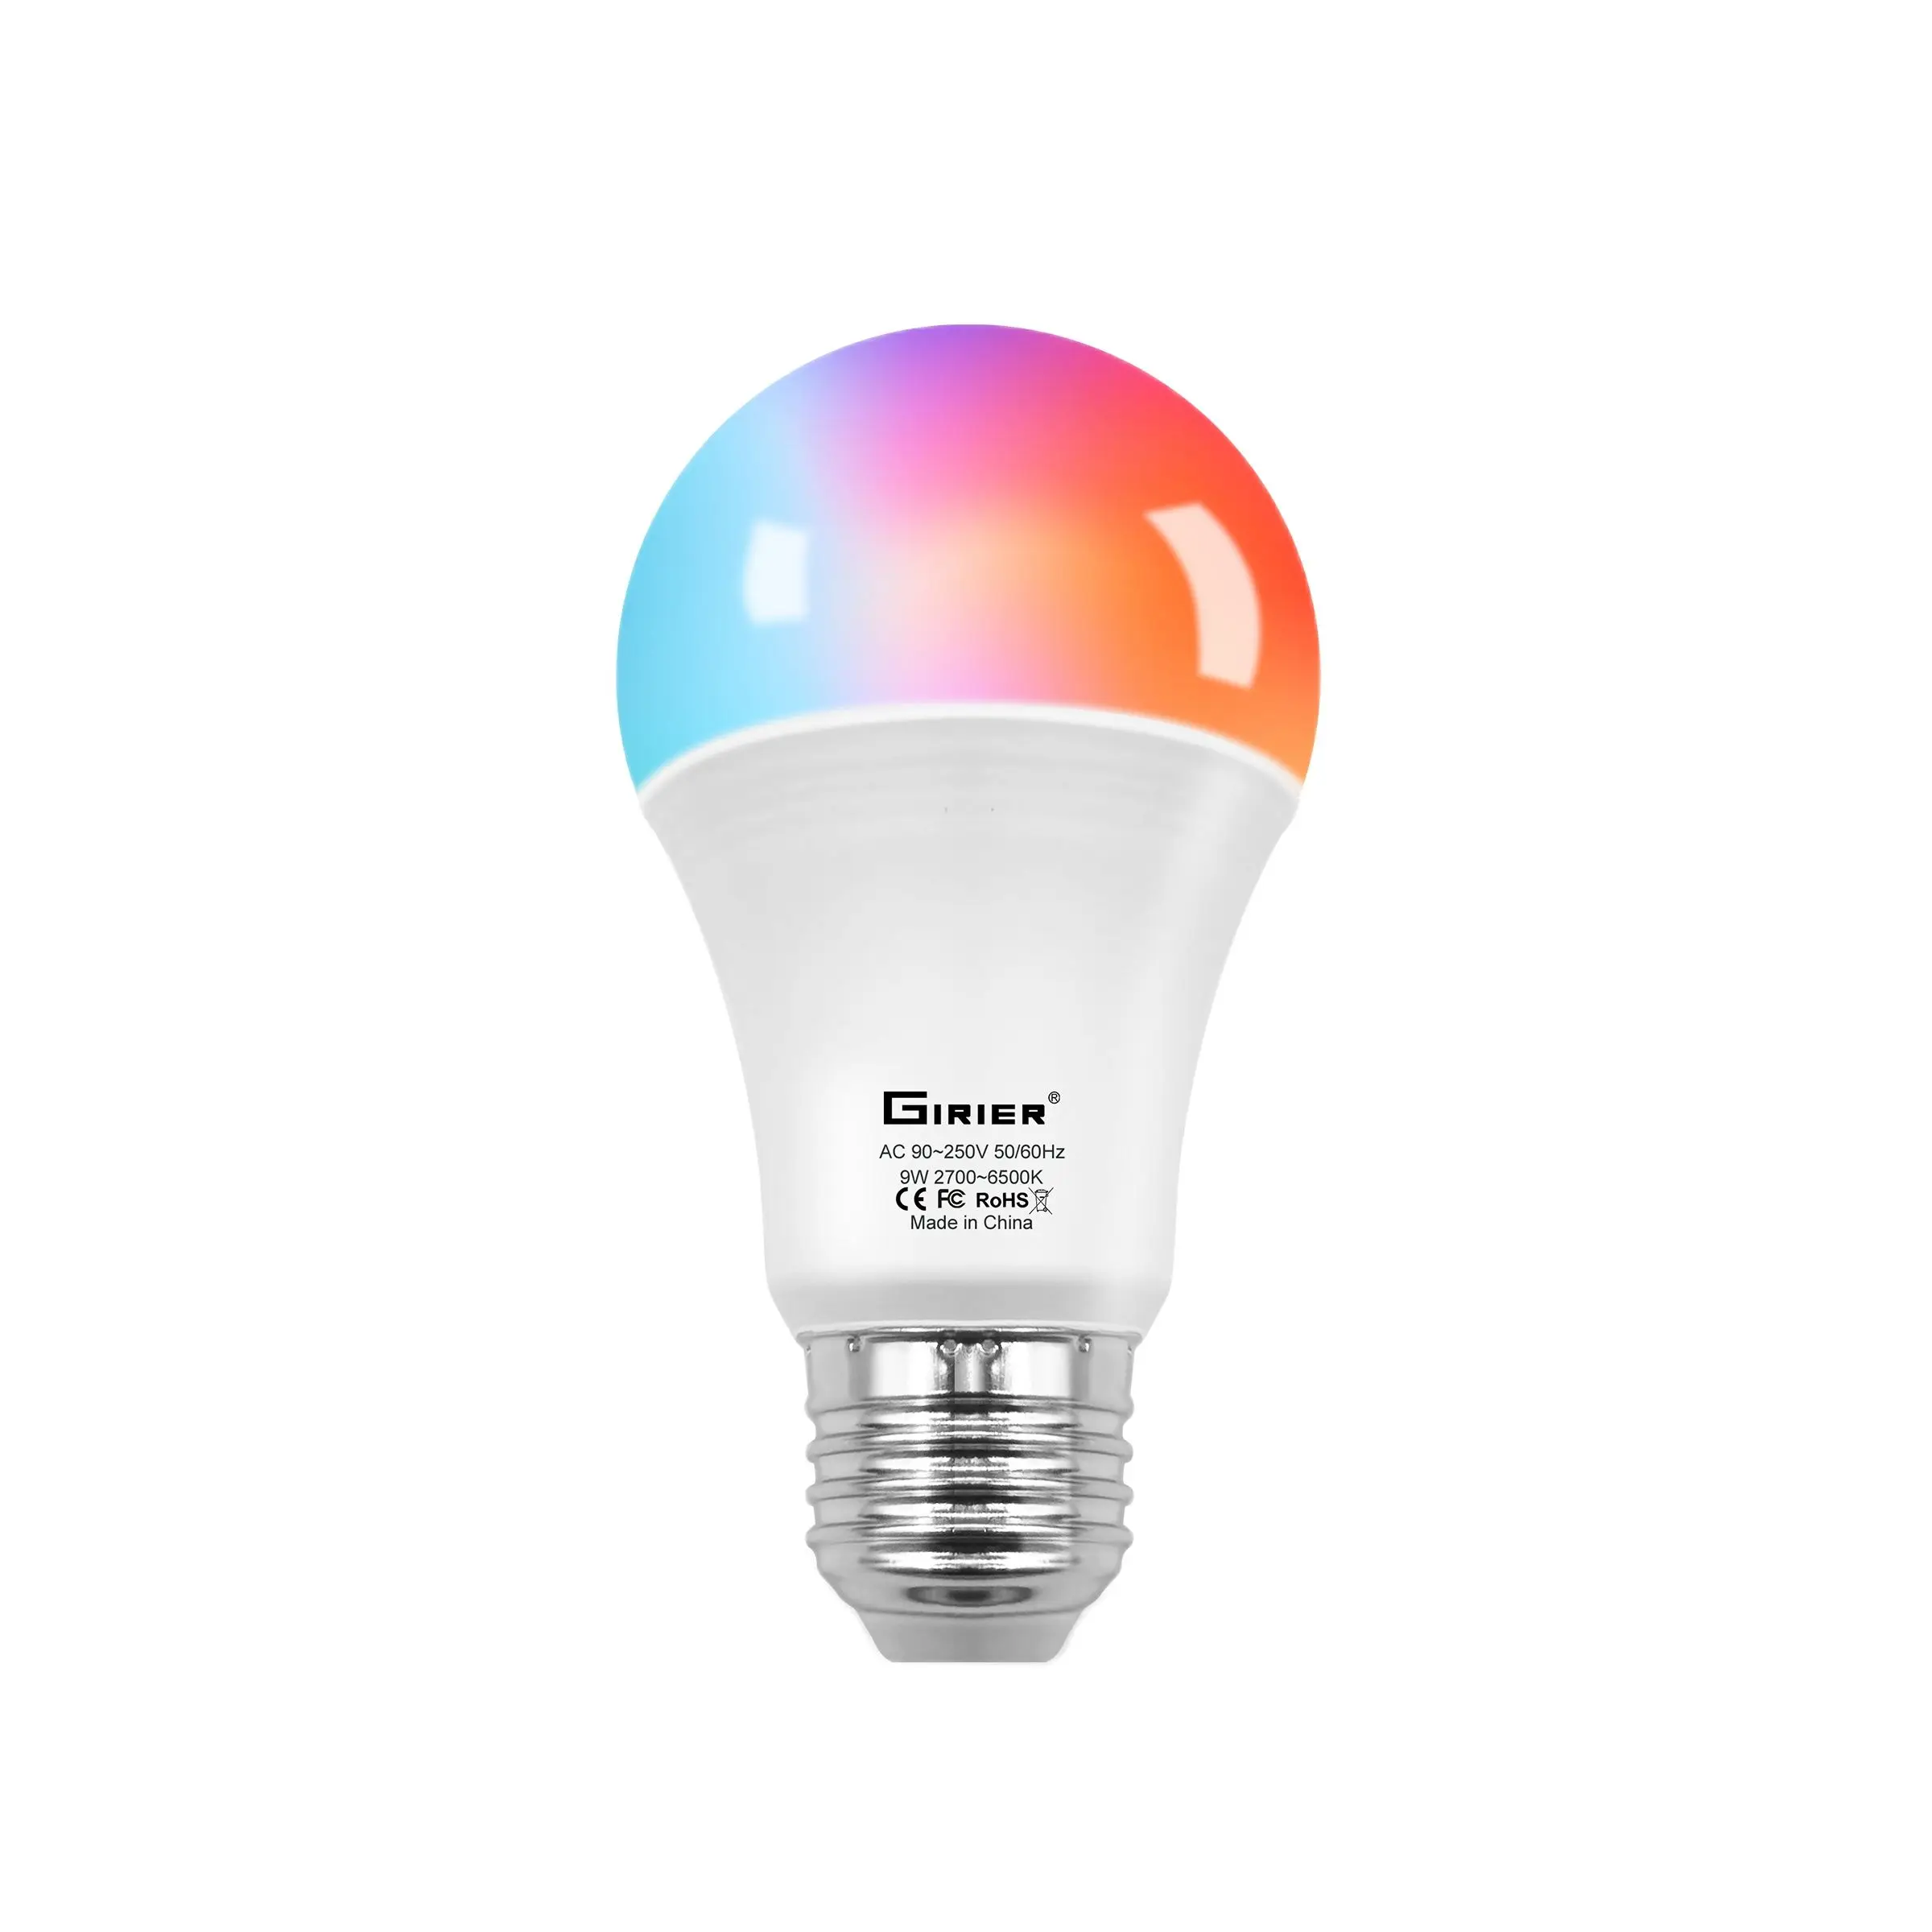 

Tuya Wifi Smart Light Bulb E27 Led RGB Colorful Changing Dimmable Light Bulb Work with Alexa Google Home No Hub Required 12W 15W